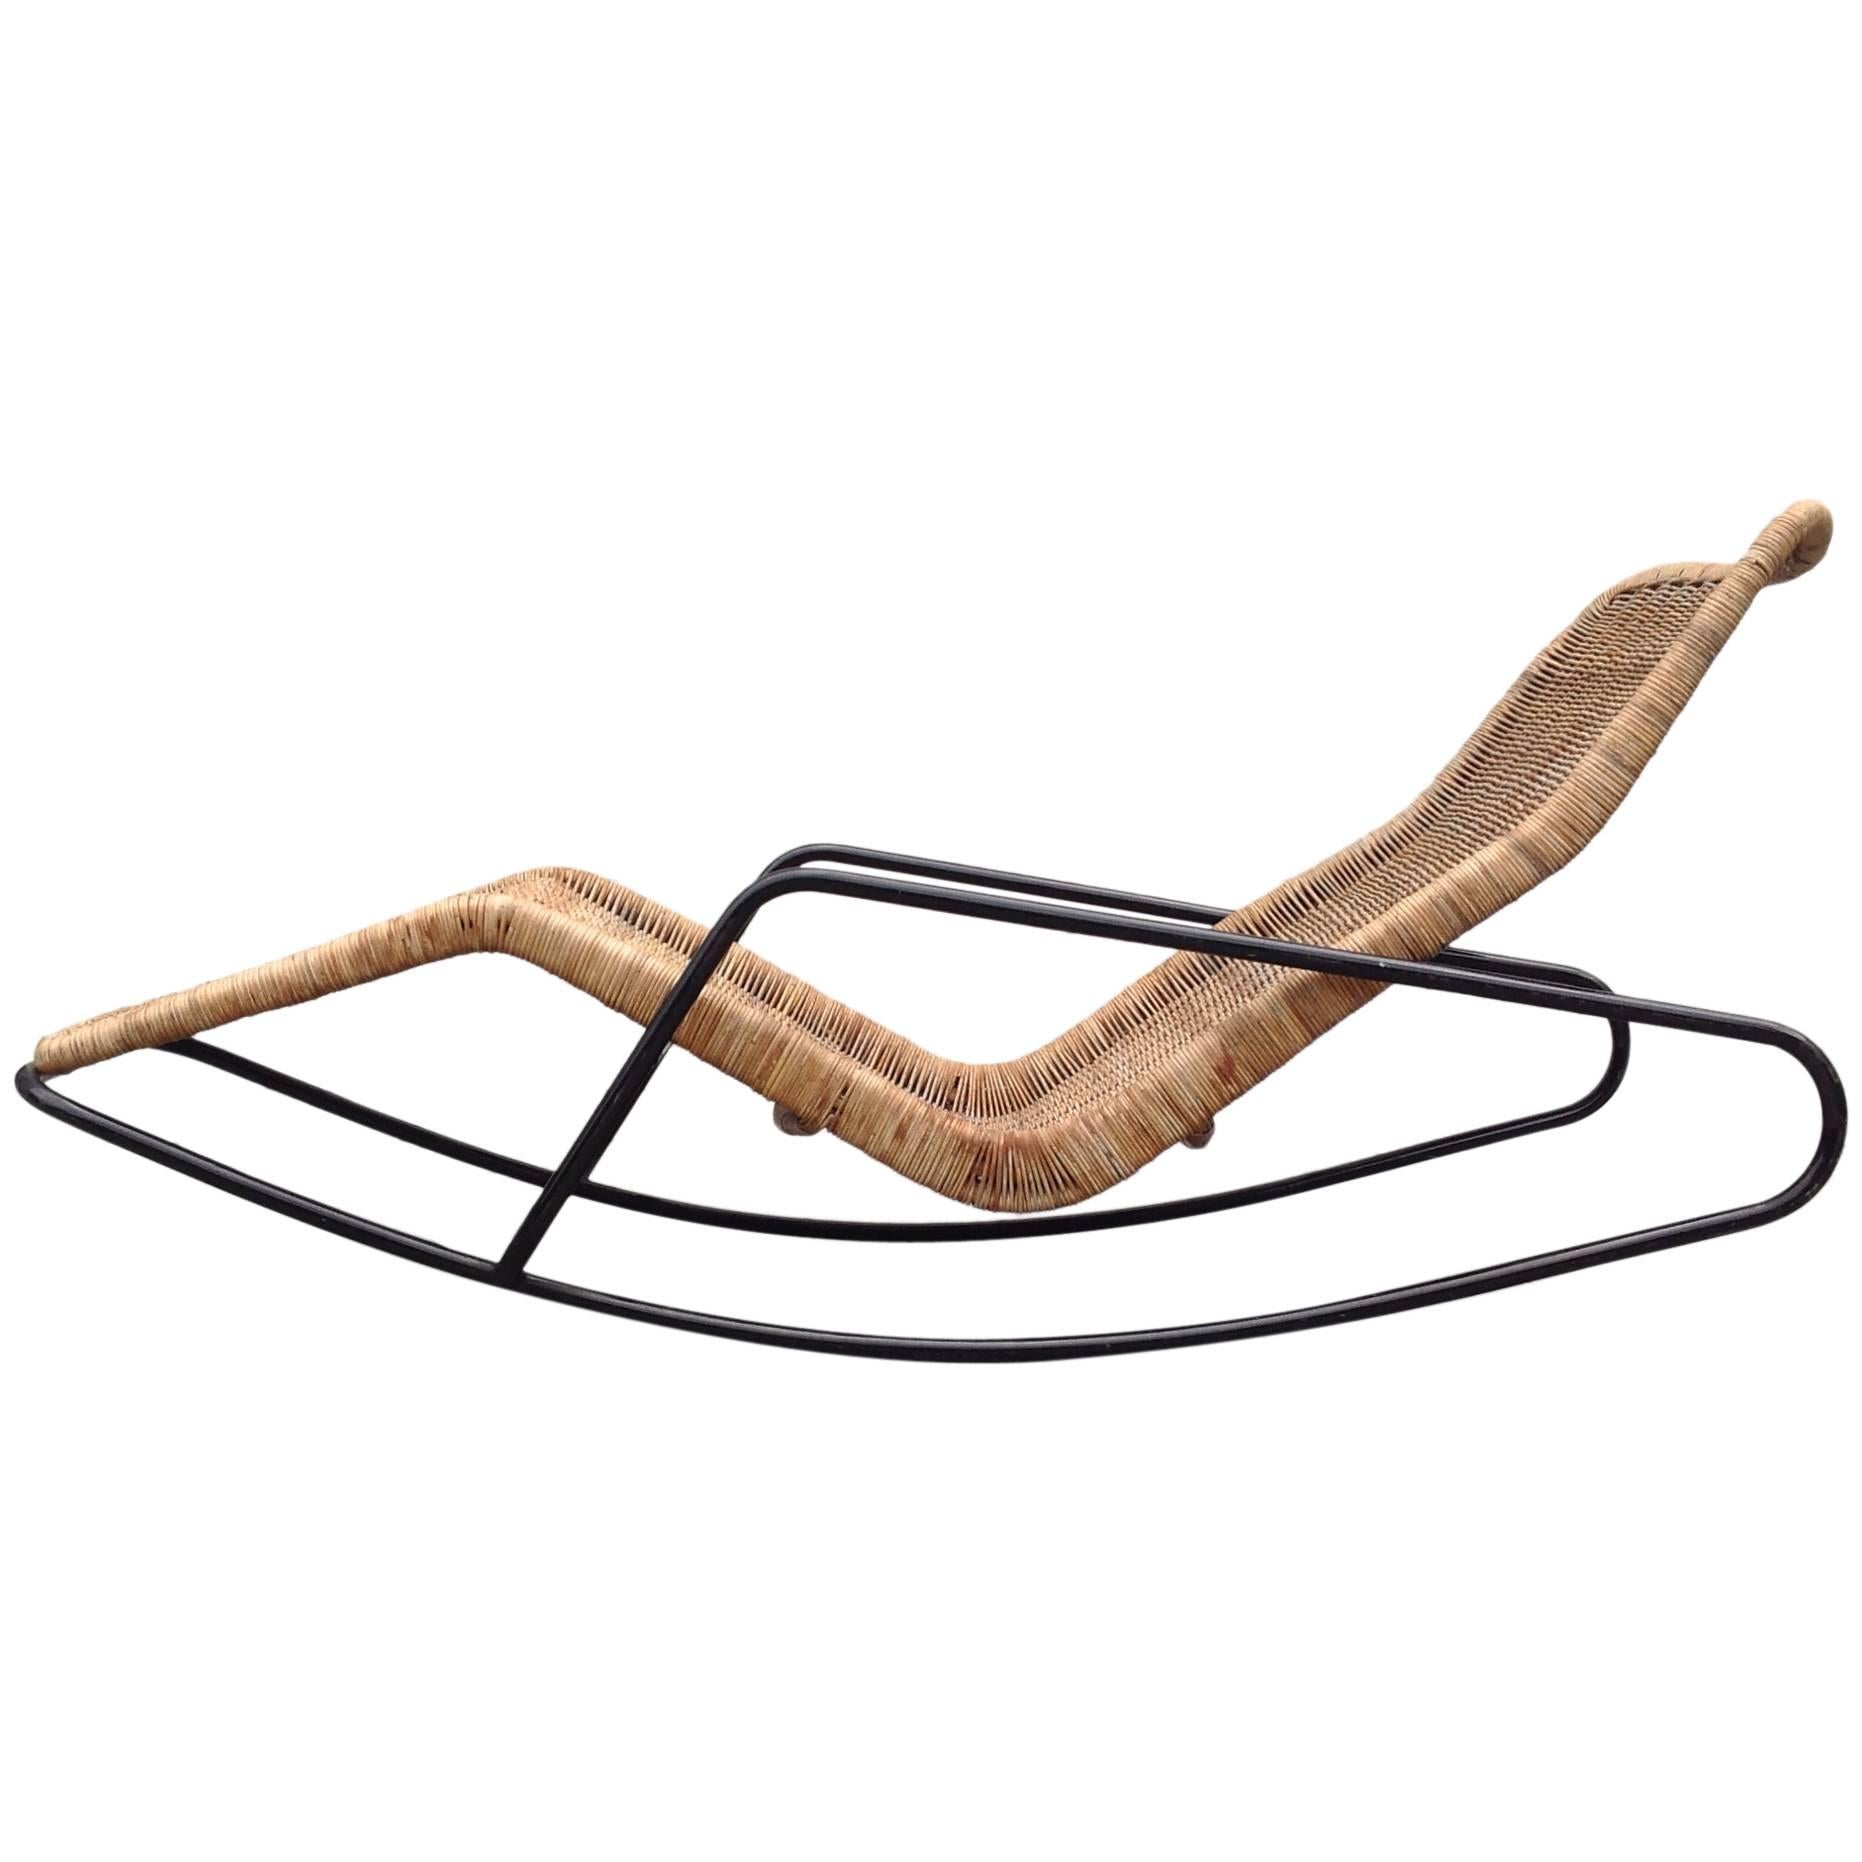 Very Rare Rocking Chaise Longue in Cane by Dirk Van Sliedrecht